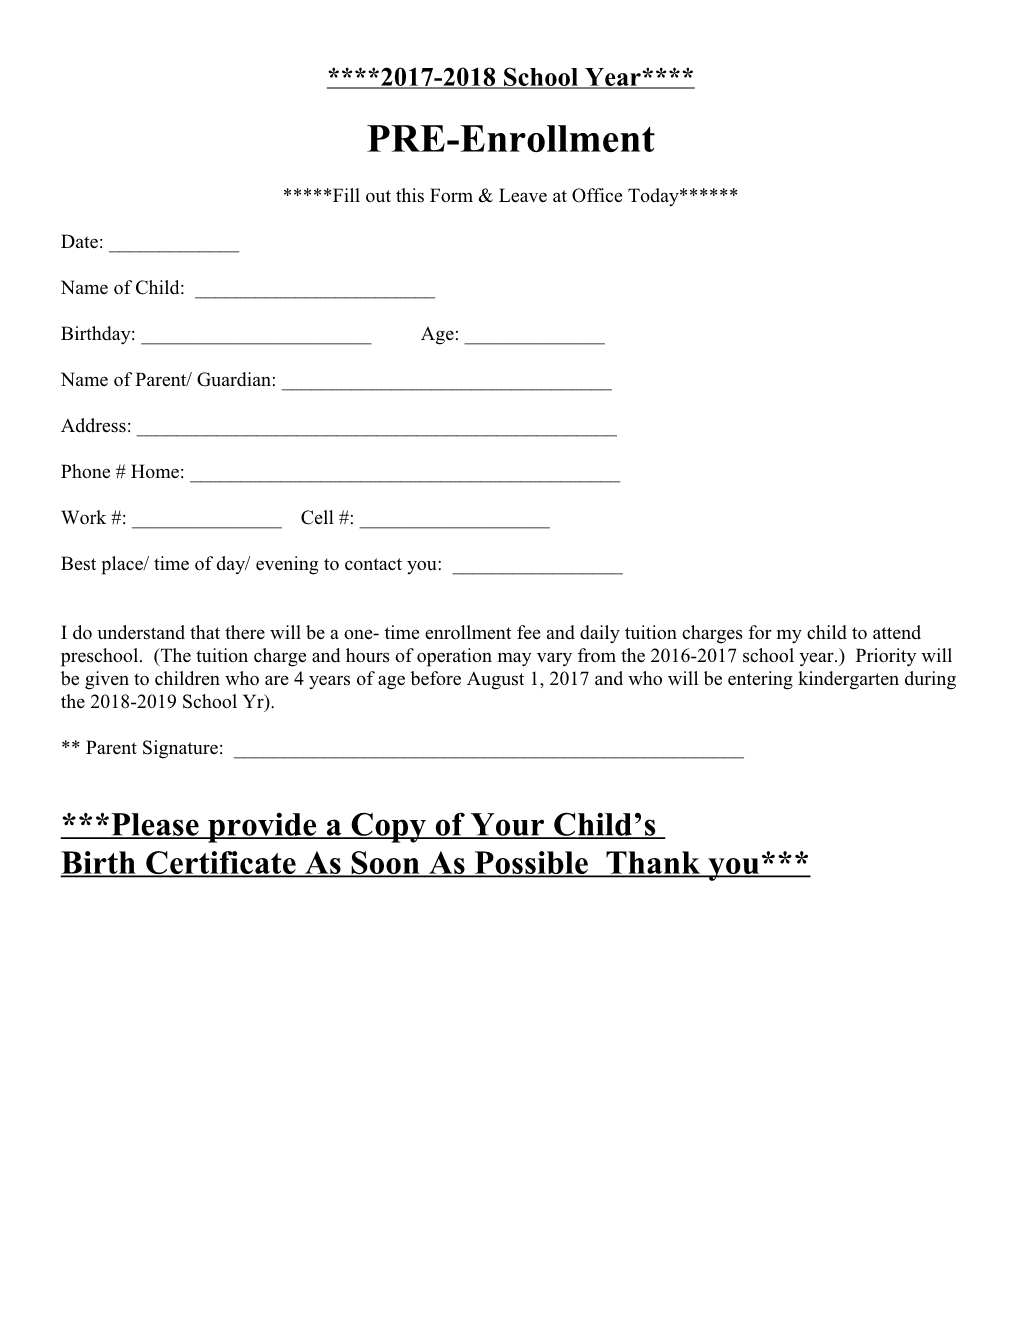 Fill out This Form & Leave at Office Today